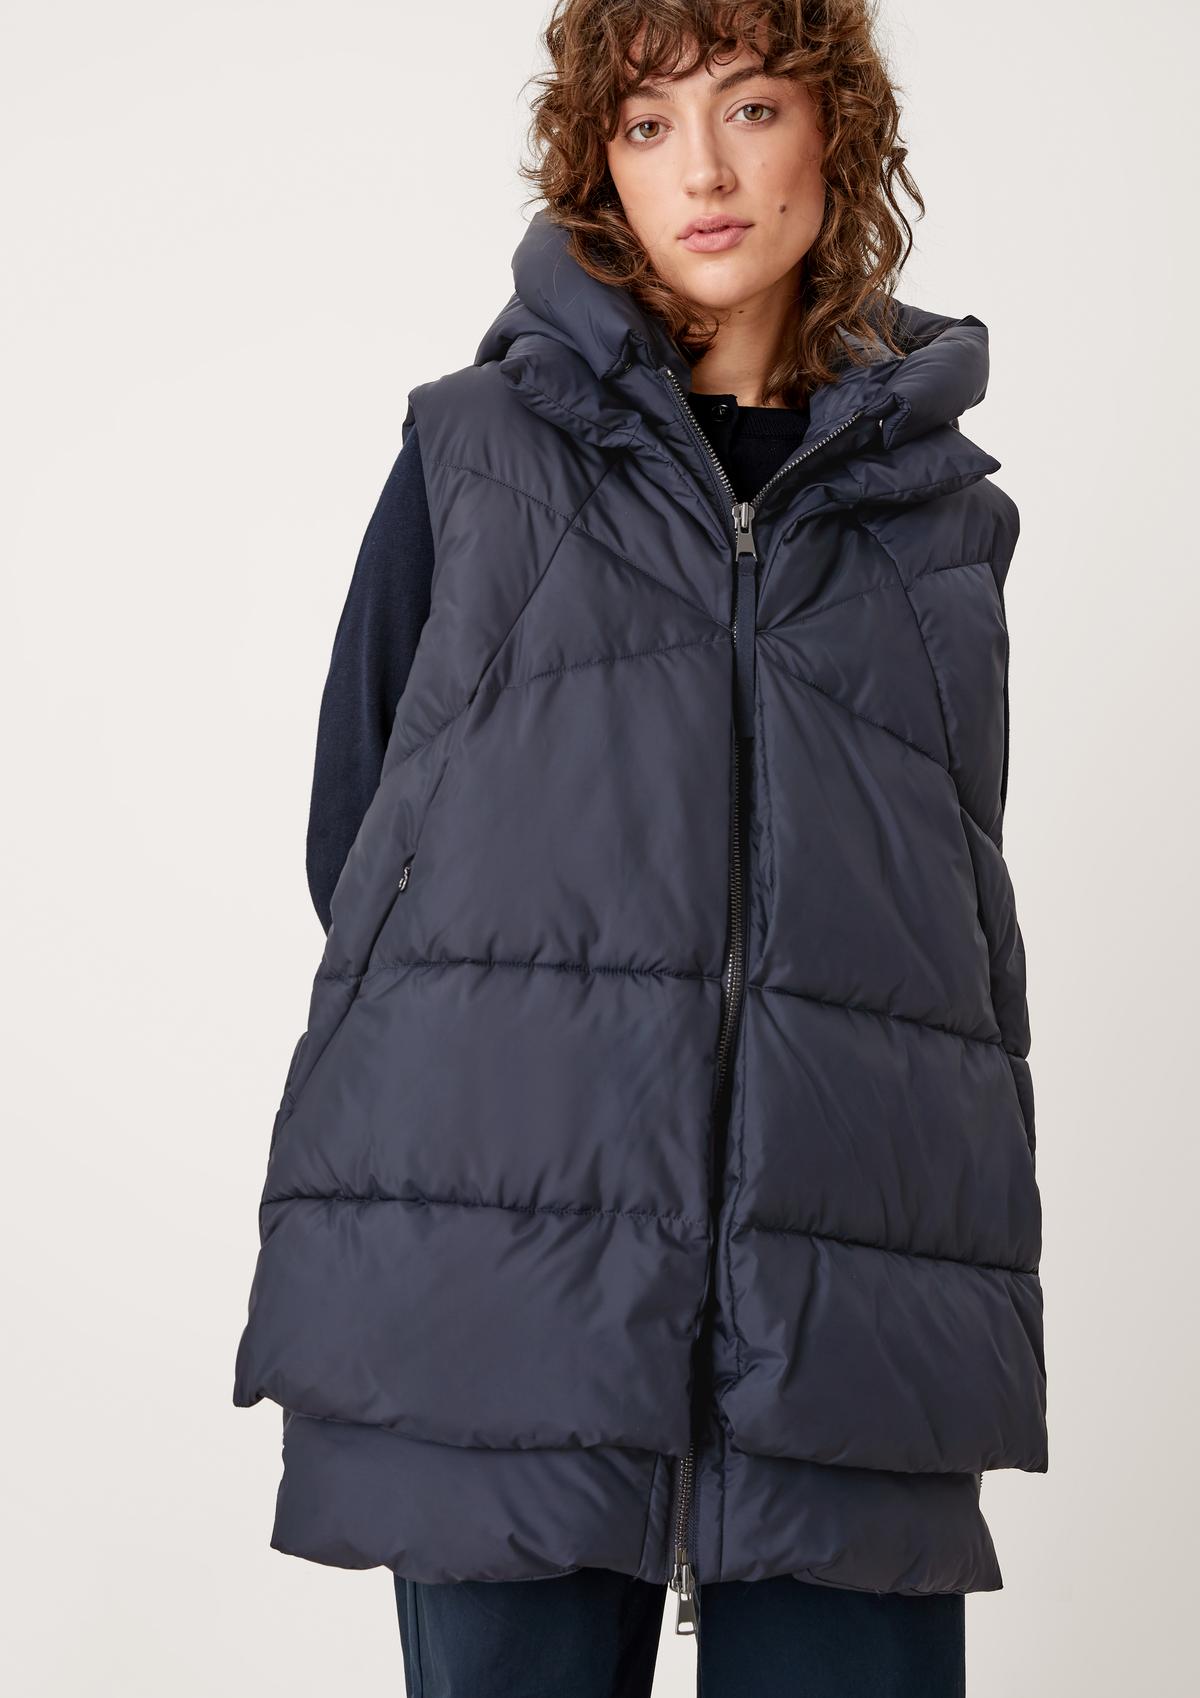 s.Oliver Body warmer in a layered look